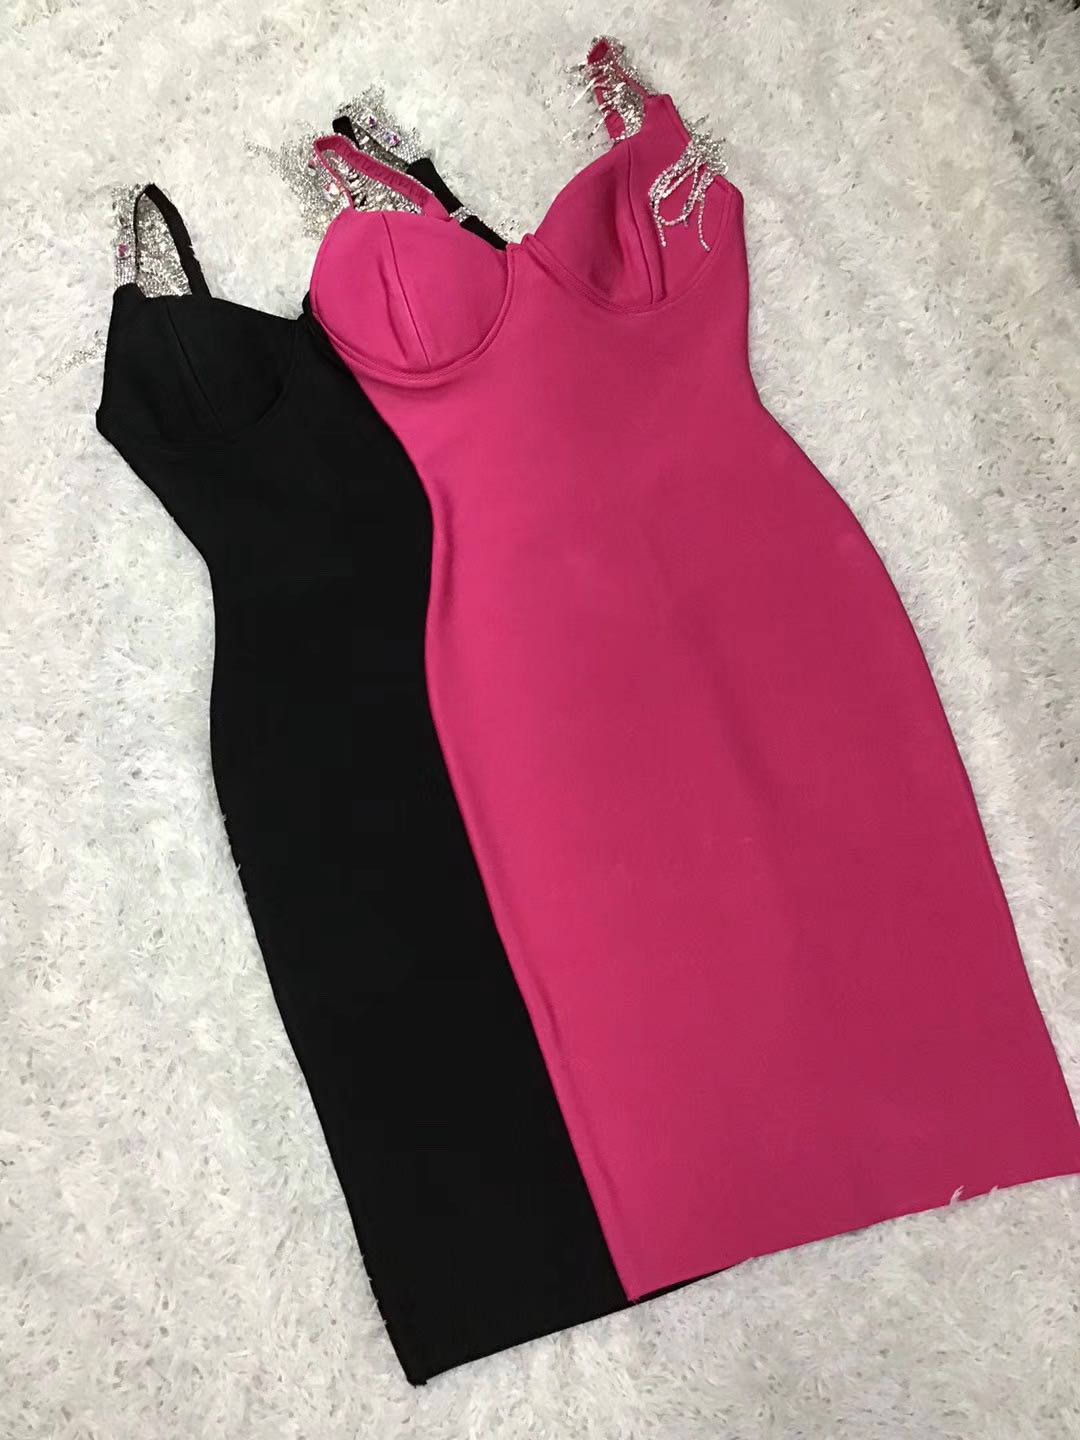 2021 High Quality Sexy Winter Hot Pink Bandage Dress Women Celebrity Party Club Black Red Vestido Crystal Dress Bodycon 